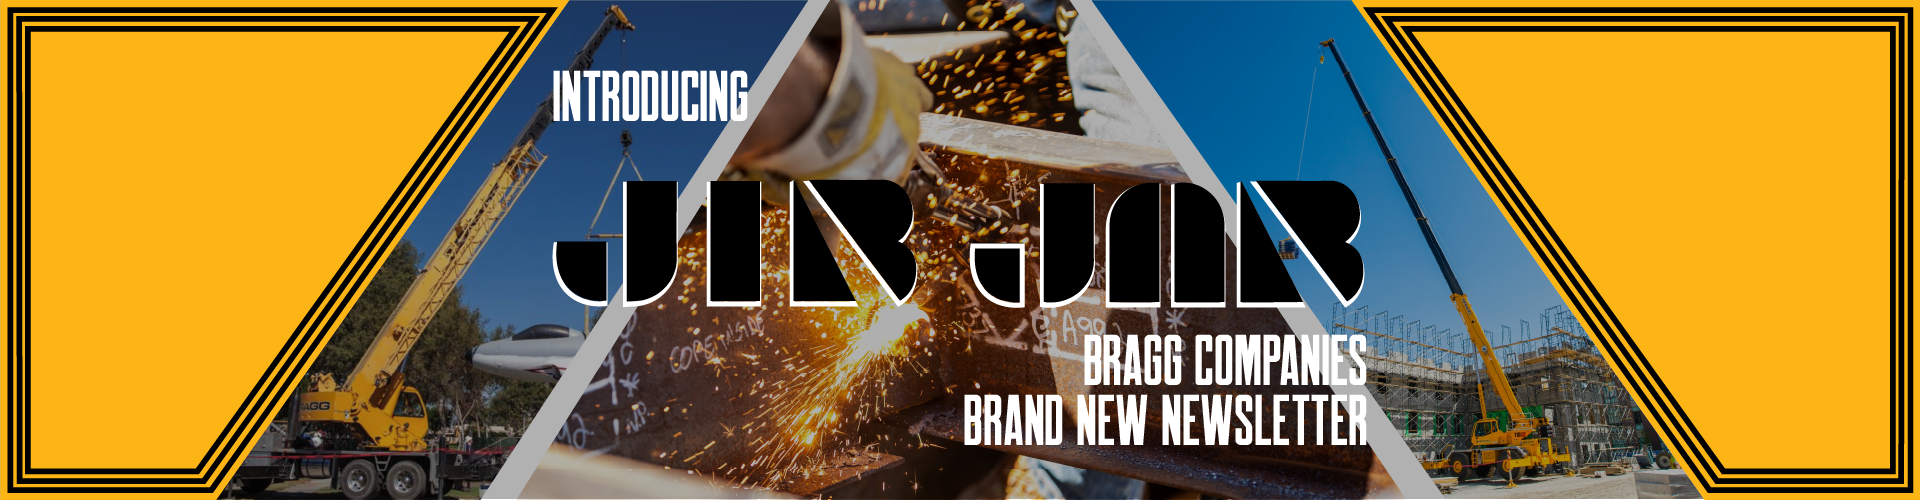 Bragg Companies' New Newsletter releases innaugural issue.